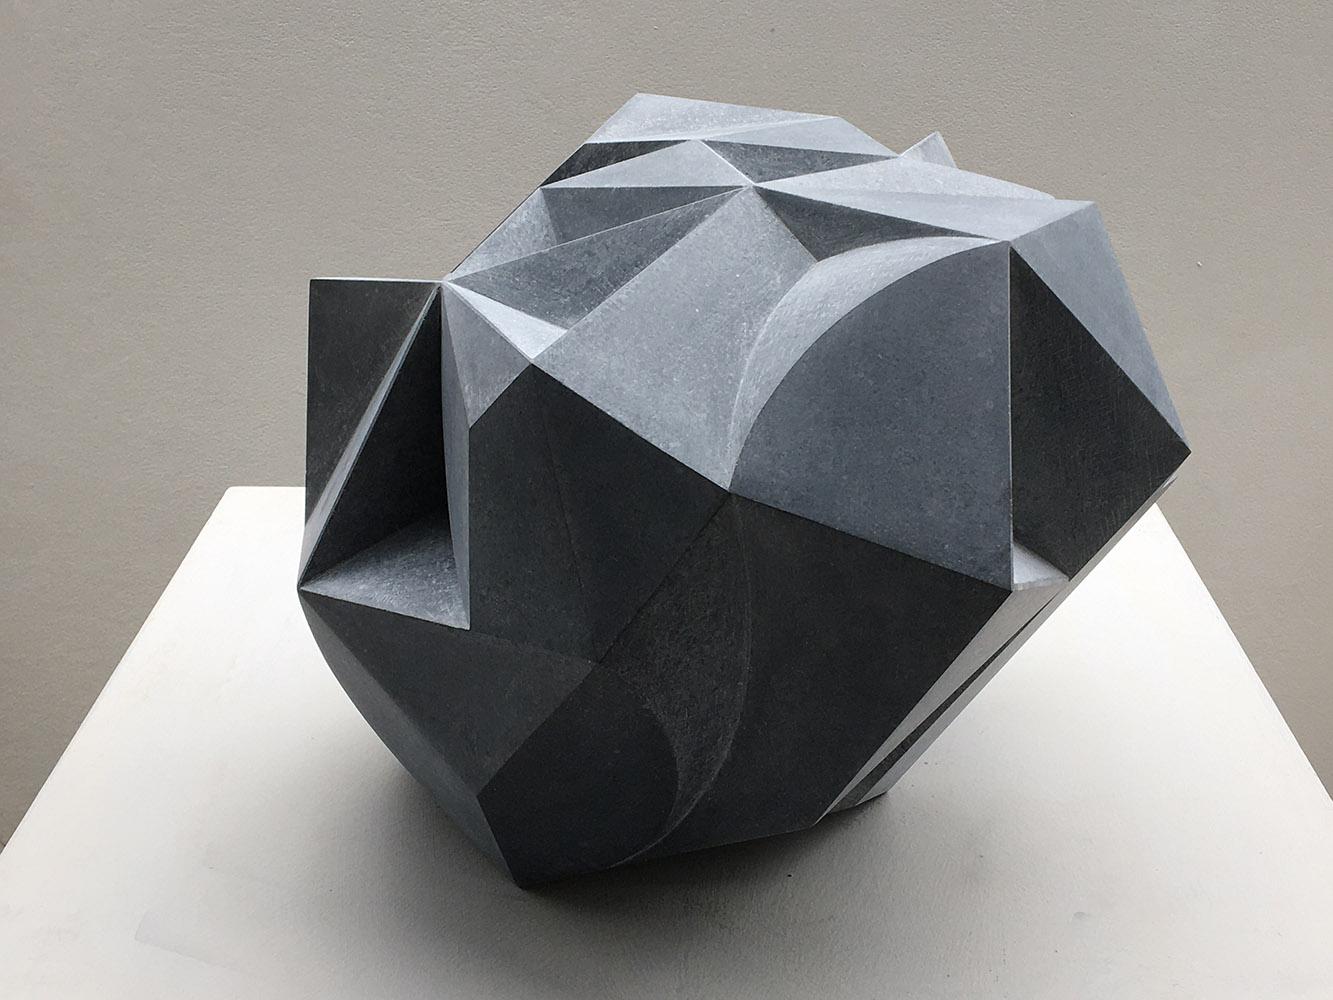 Caniform is a unique Irish blue limestone sculpture by contemporary artist Richard Perry, dimensions are 26 × 37 × 37 cm (10.2 × 14.6 × 14.6 in). 
The sculpture is signed and comes with a certificate of authenticity.

This sculpture is a good